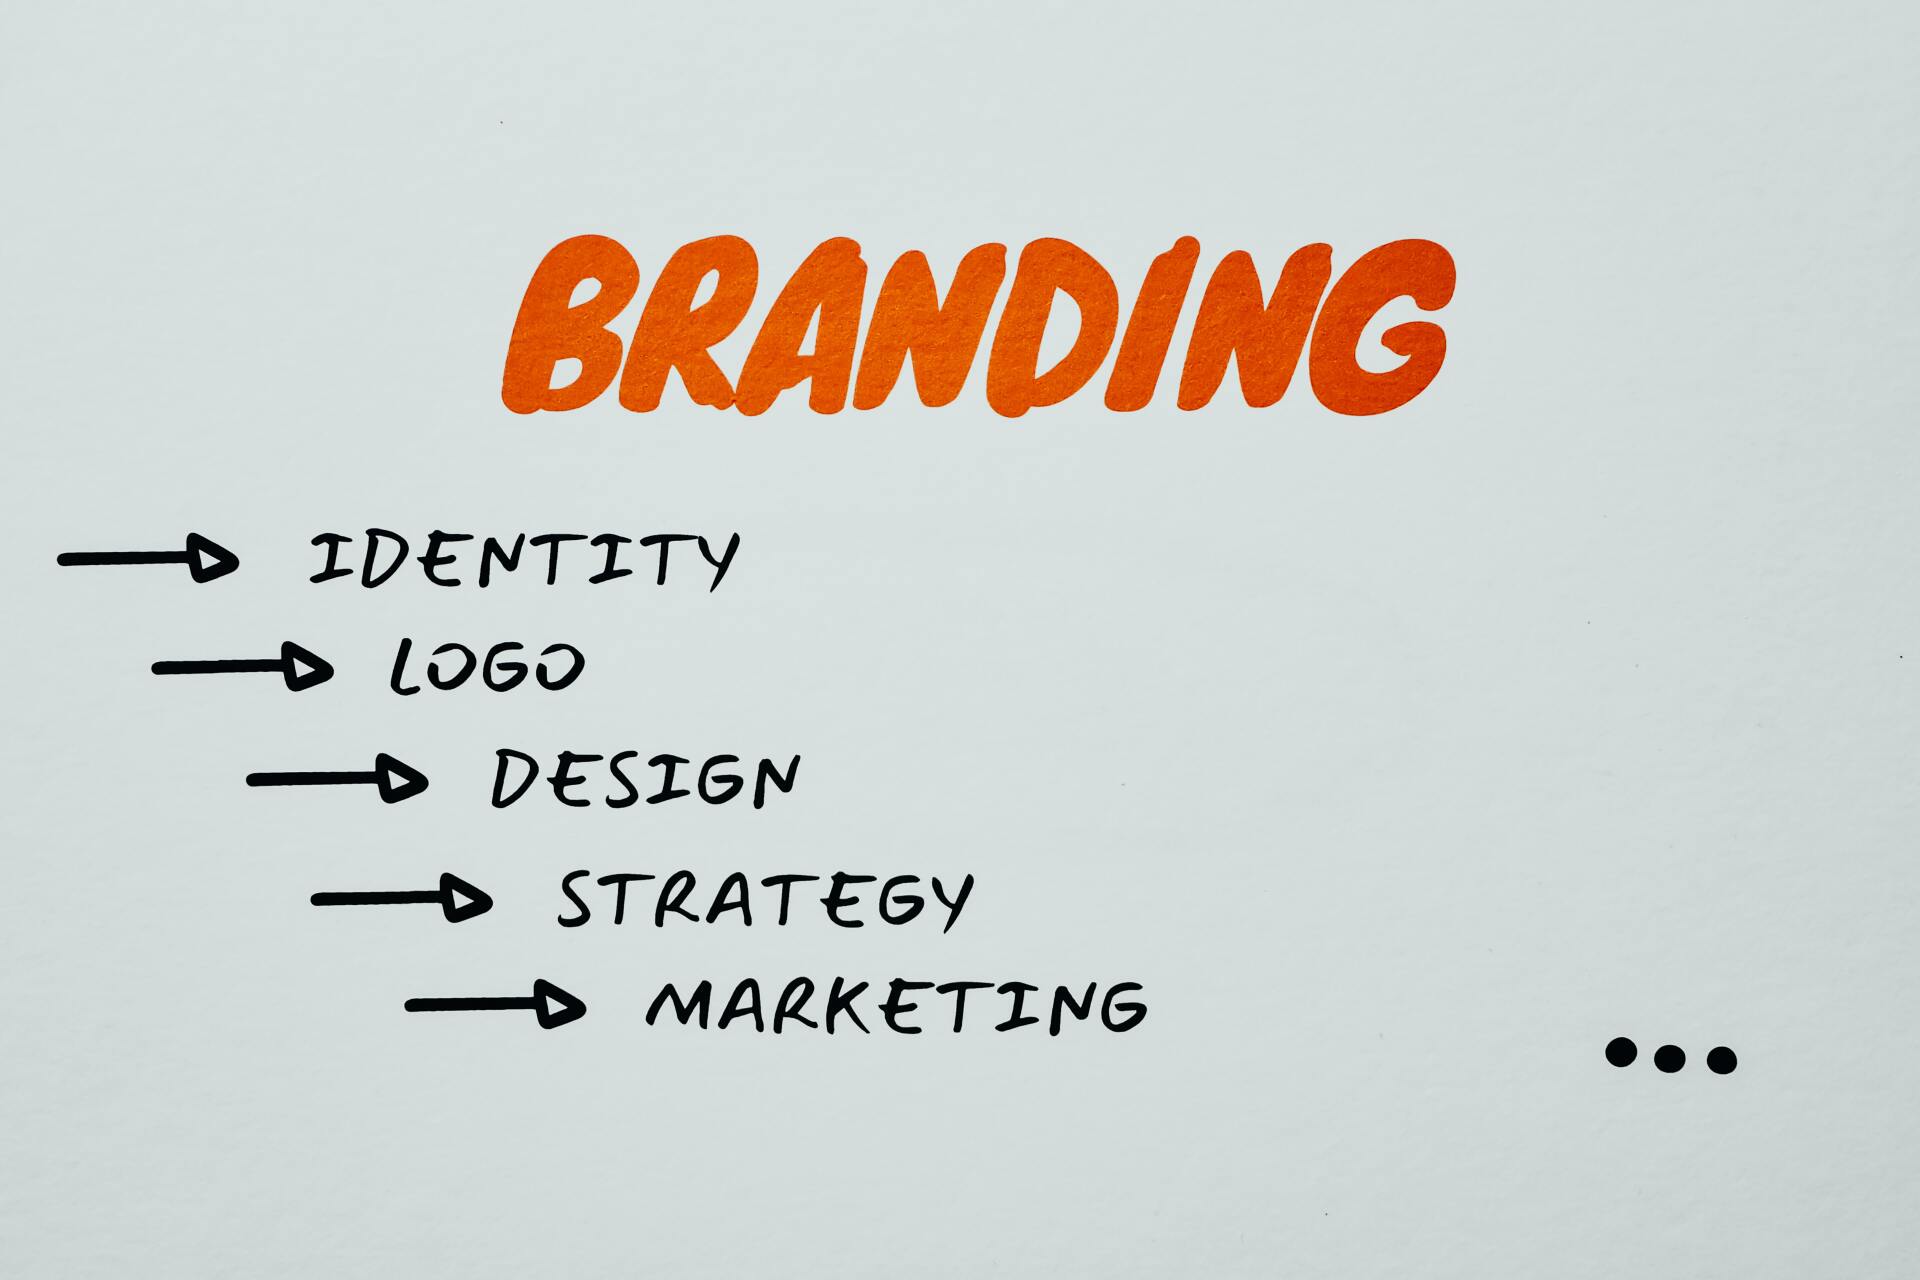 Branding written on white board along with other branding words